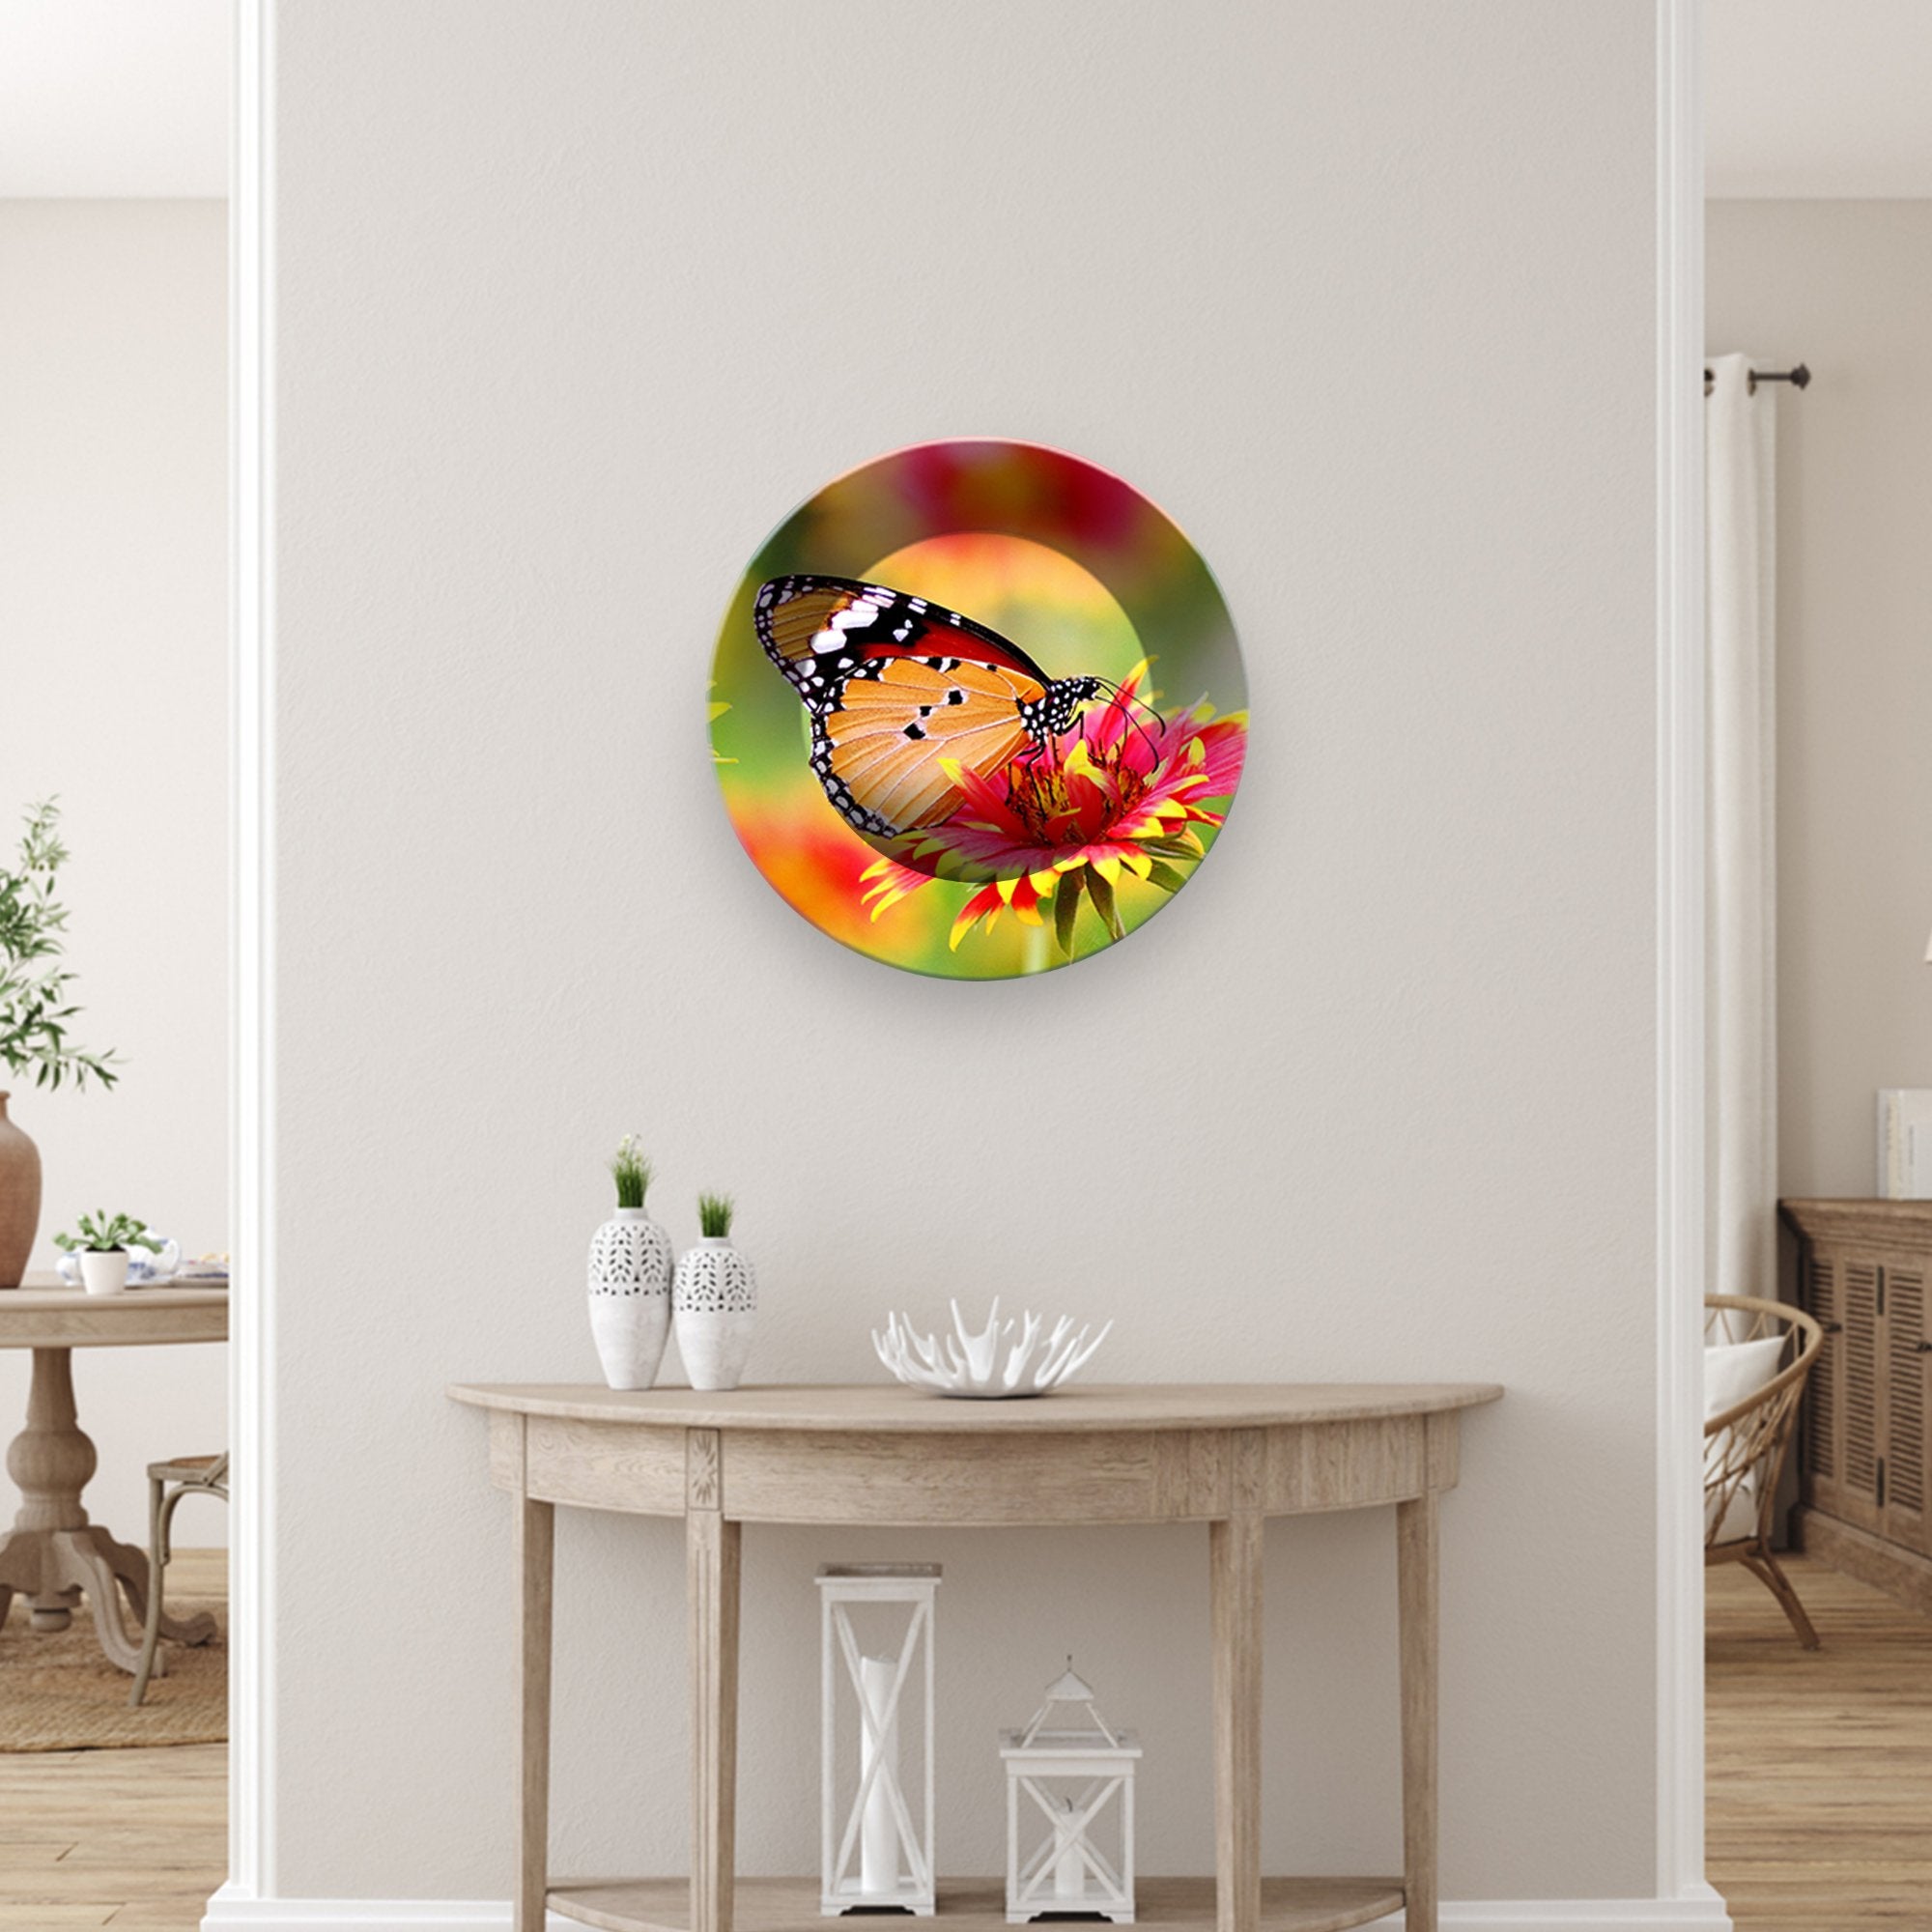  Ceramic Wall Plate Painting - Vibecrafts